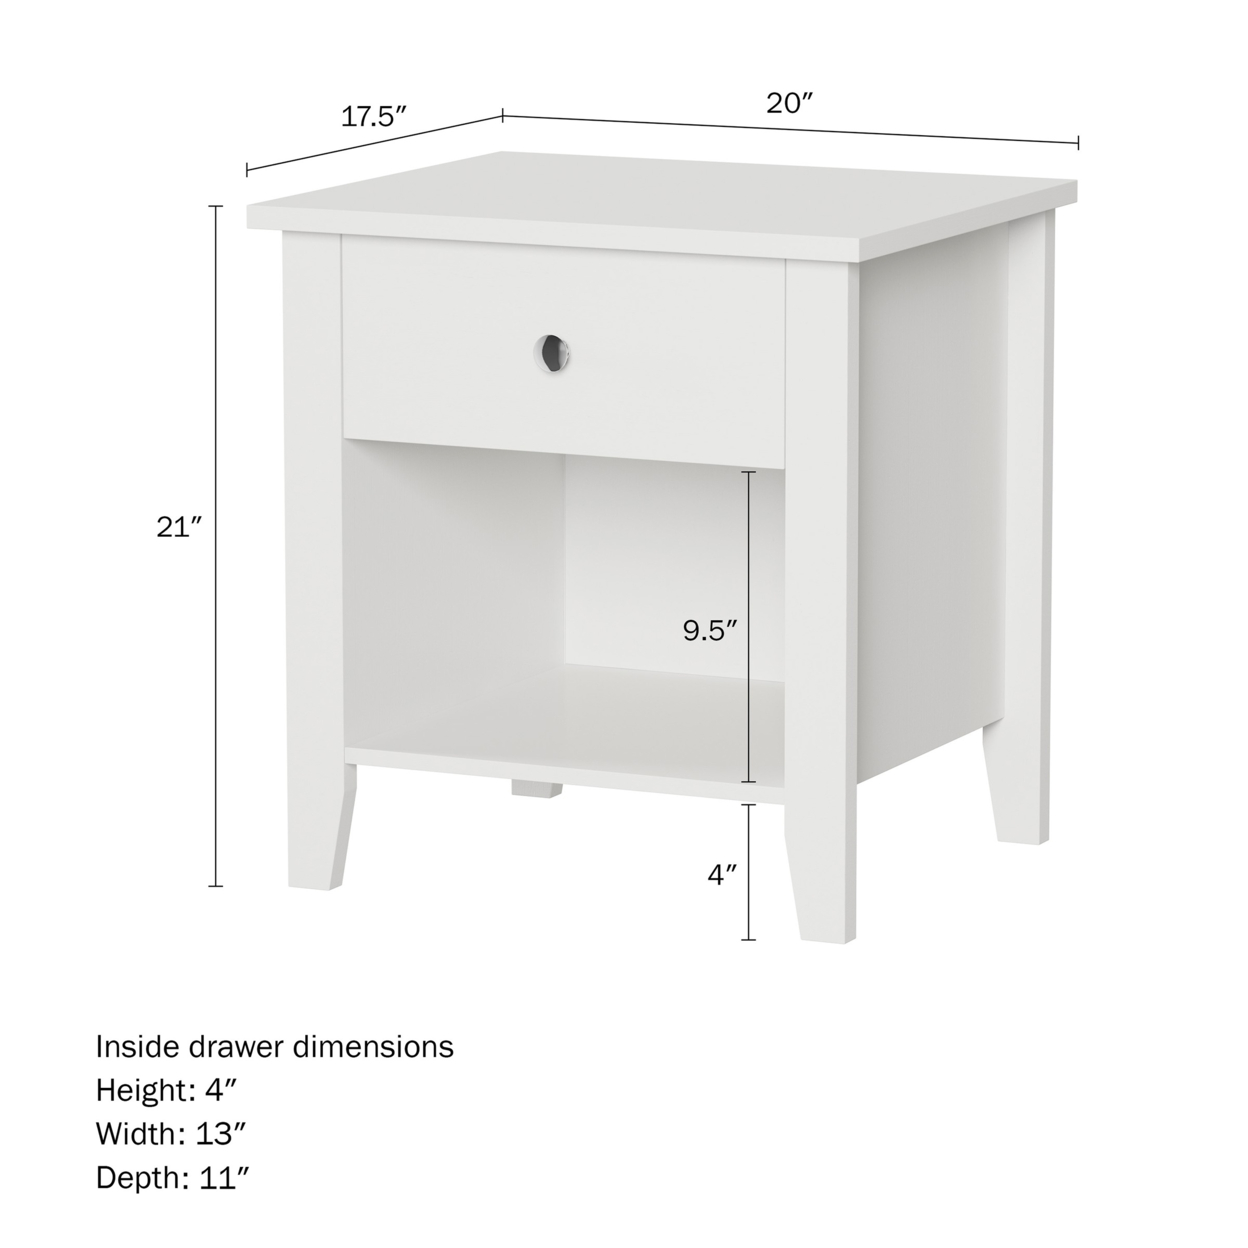 End Table With Drawer- Sofa Side Table With Storage Shelf White Wooden Nightstand For Bedroom Or Living Room